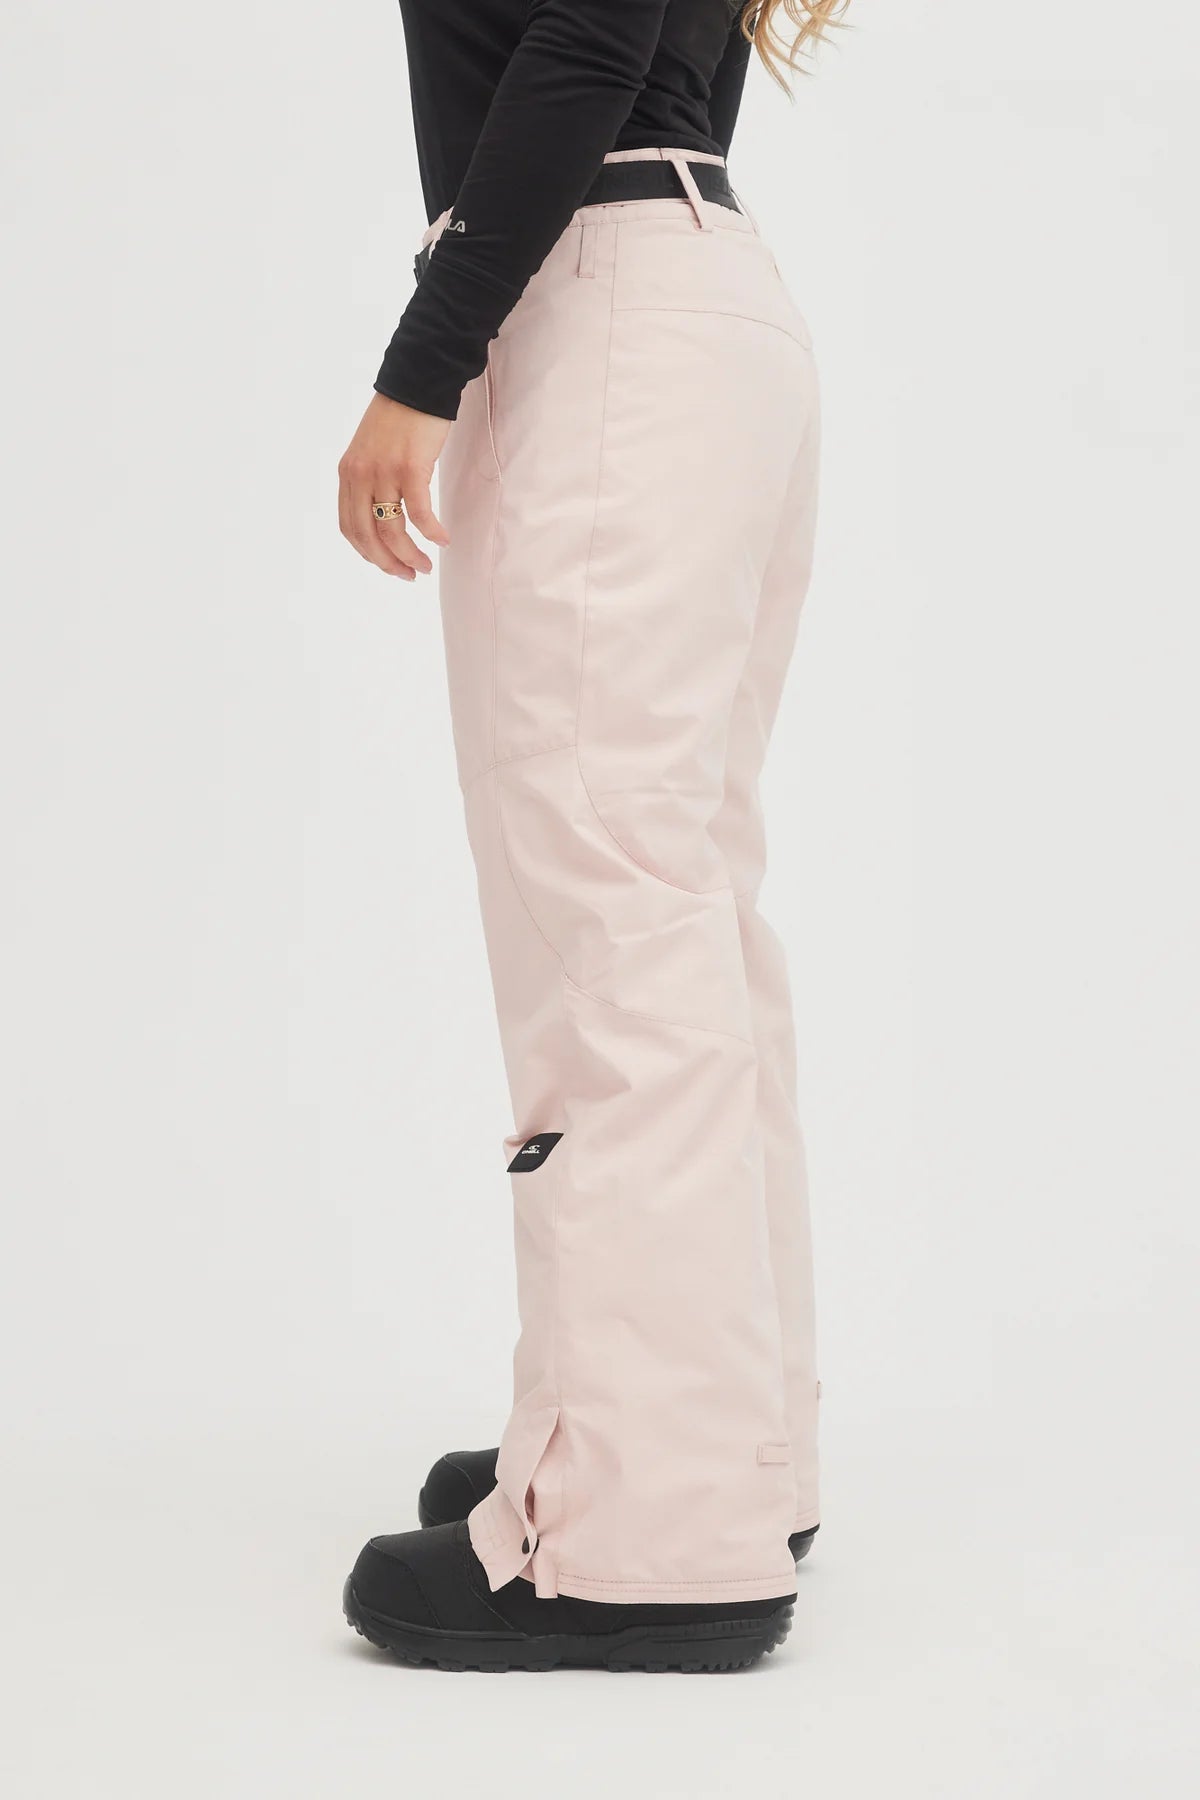 O'Neill Star Insulated Women'S Ski Snowboard Pants-Sports Replay - Sports Excellence-Sports Replay - Sports Excellence